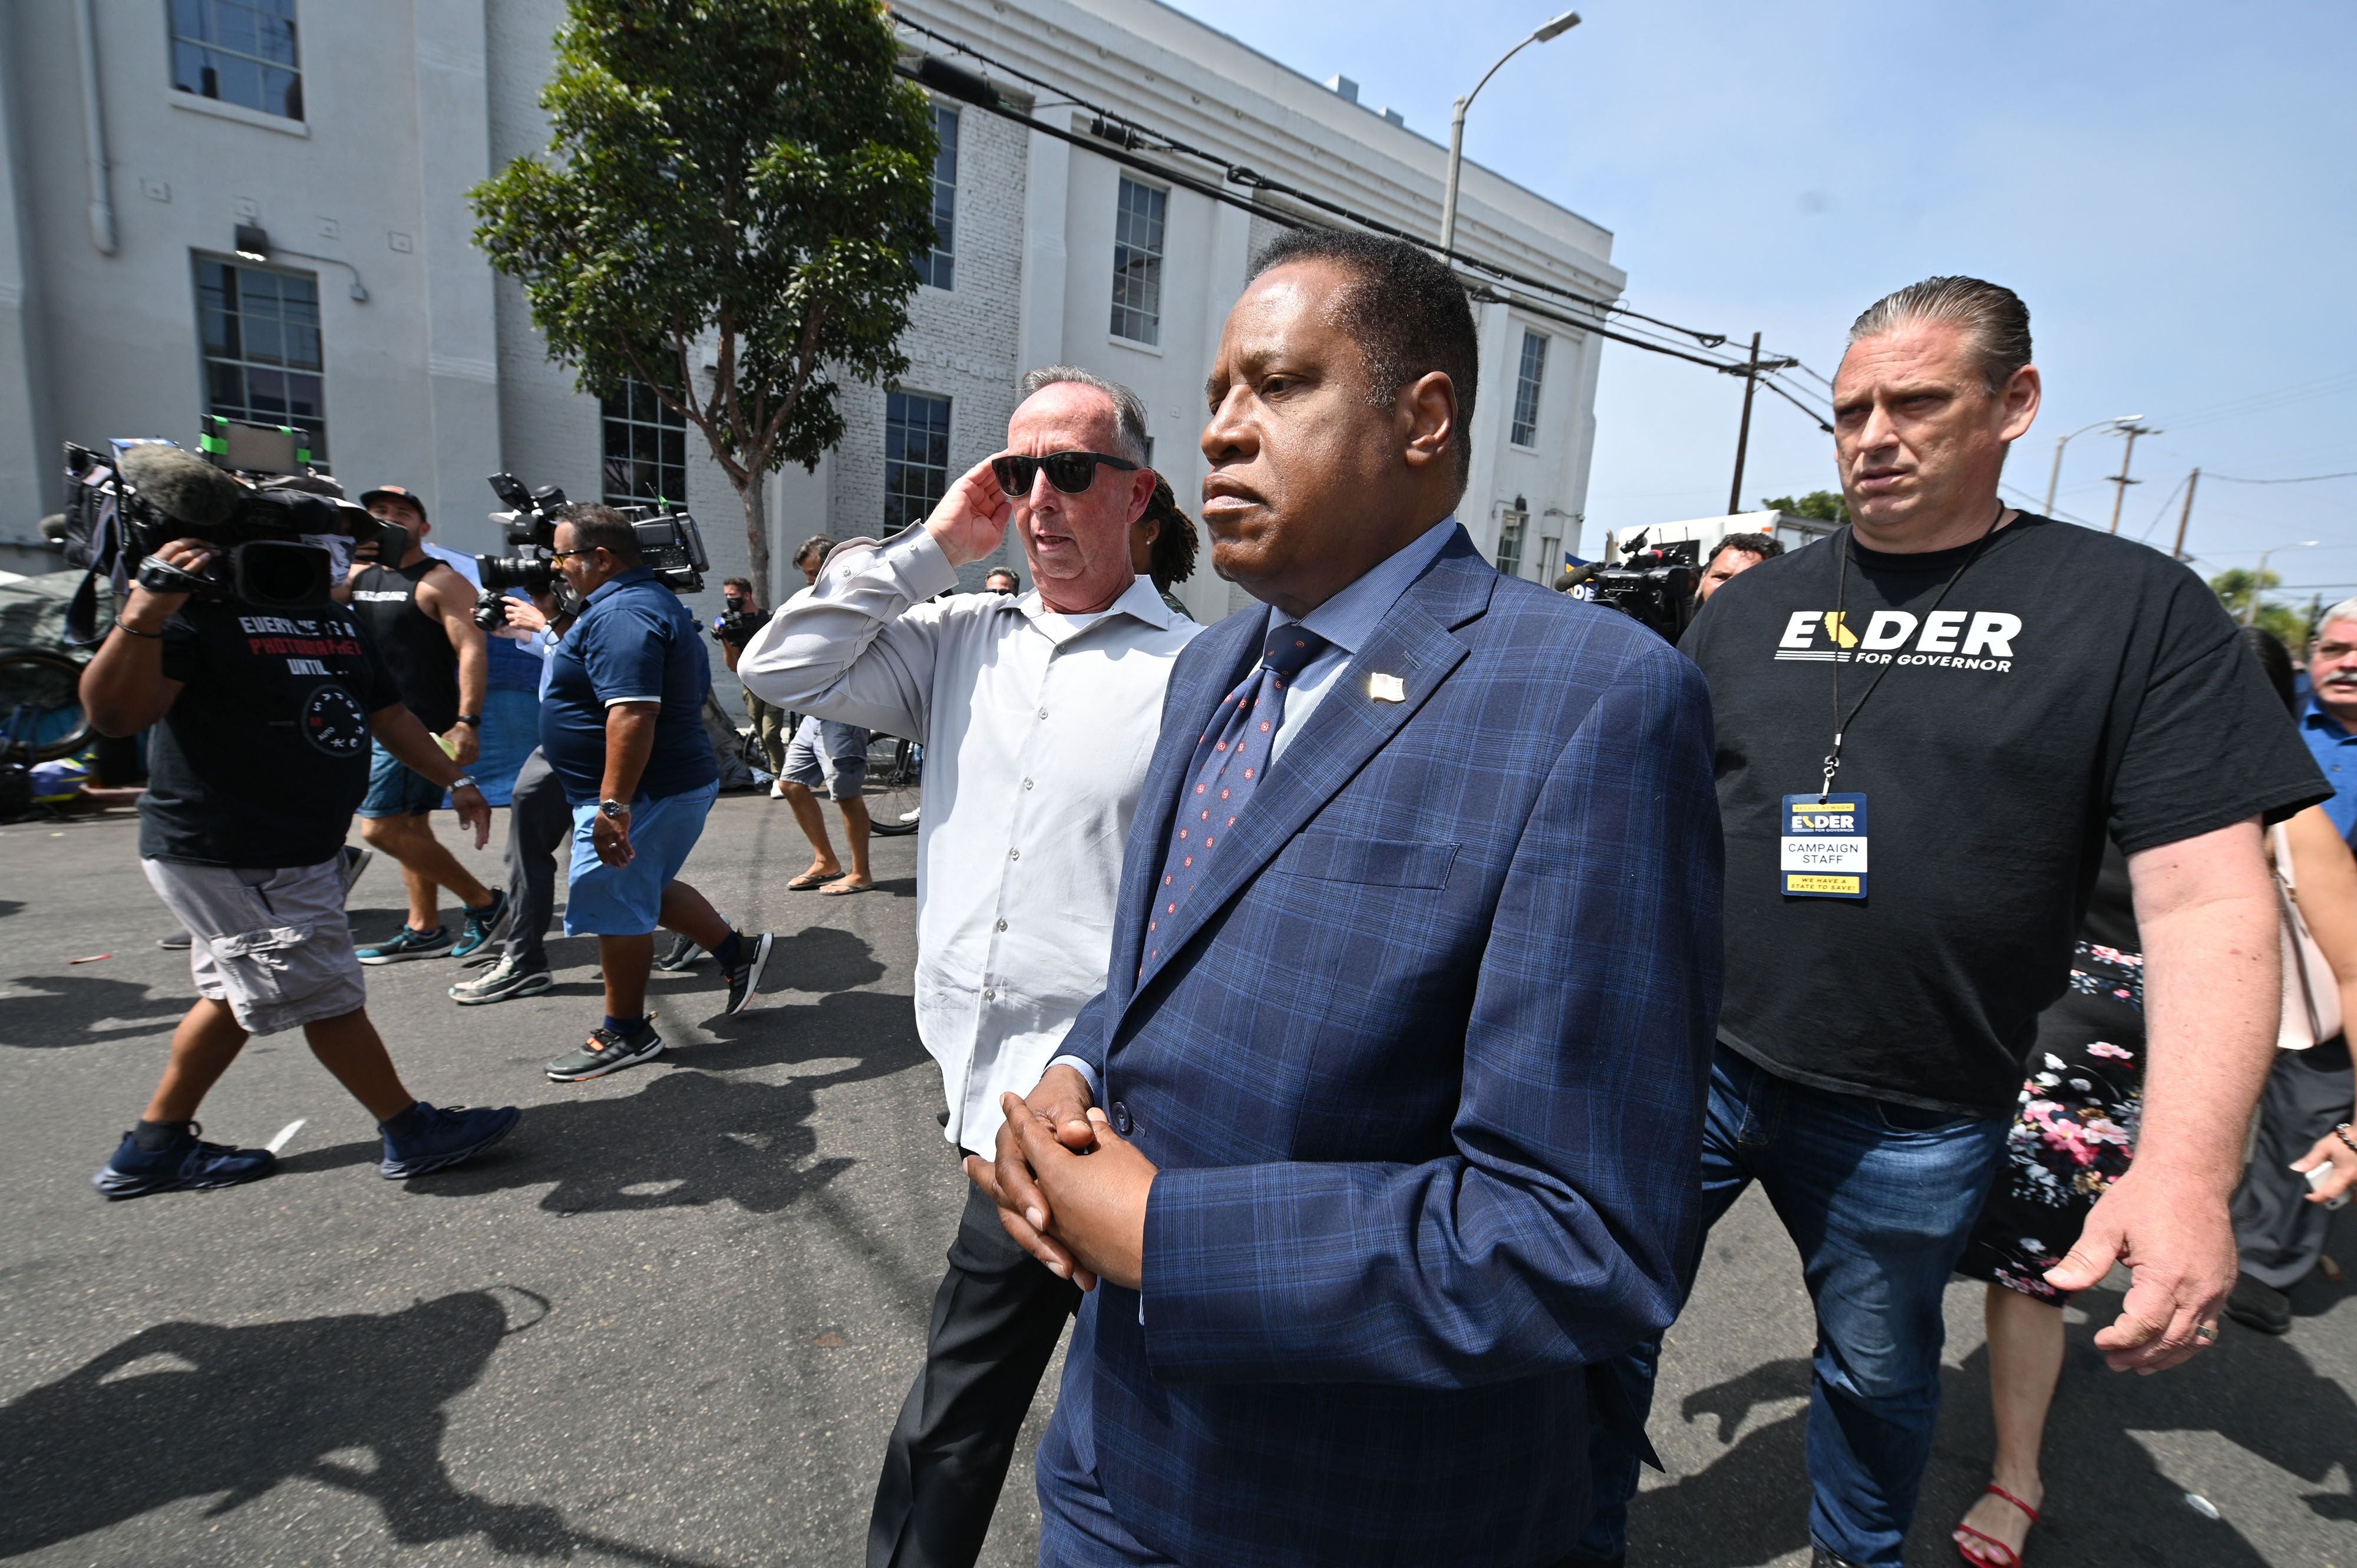 Conservative talk show host and gubernatorial recall candidate Larry Elder (C) walks along streets lined with tents of unhoused people, in the Venice neighborhood of Los Angeles, California, 8 September 2021.